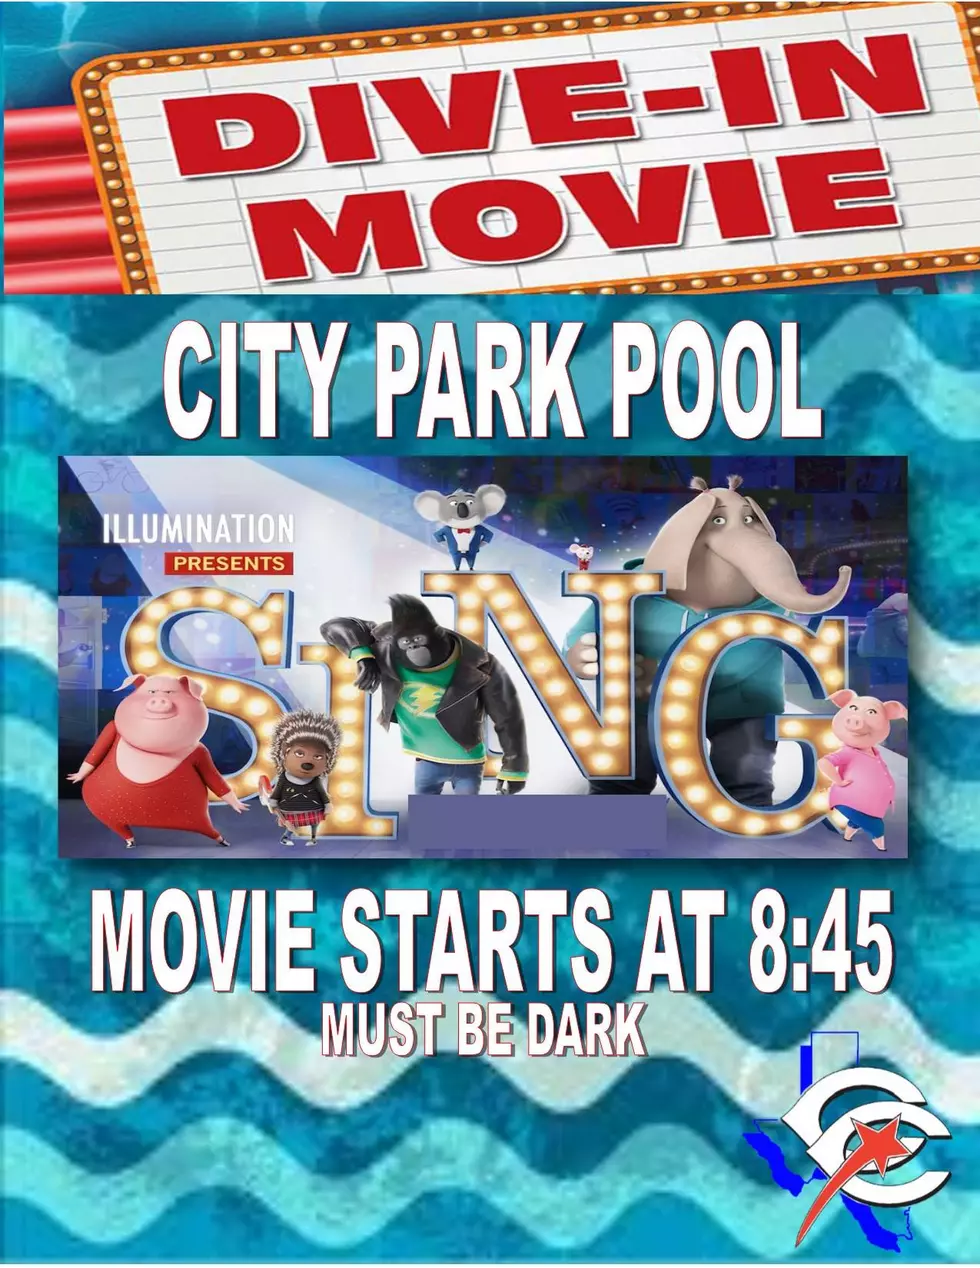 Copperas Cove Dive-In Movie Tonight At City Park Pool!